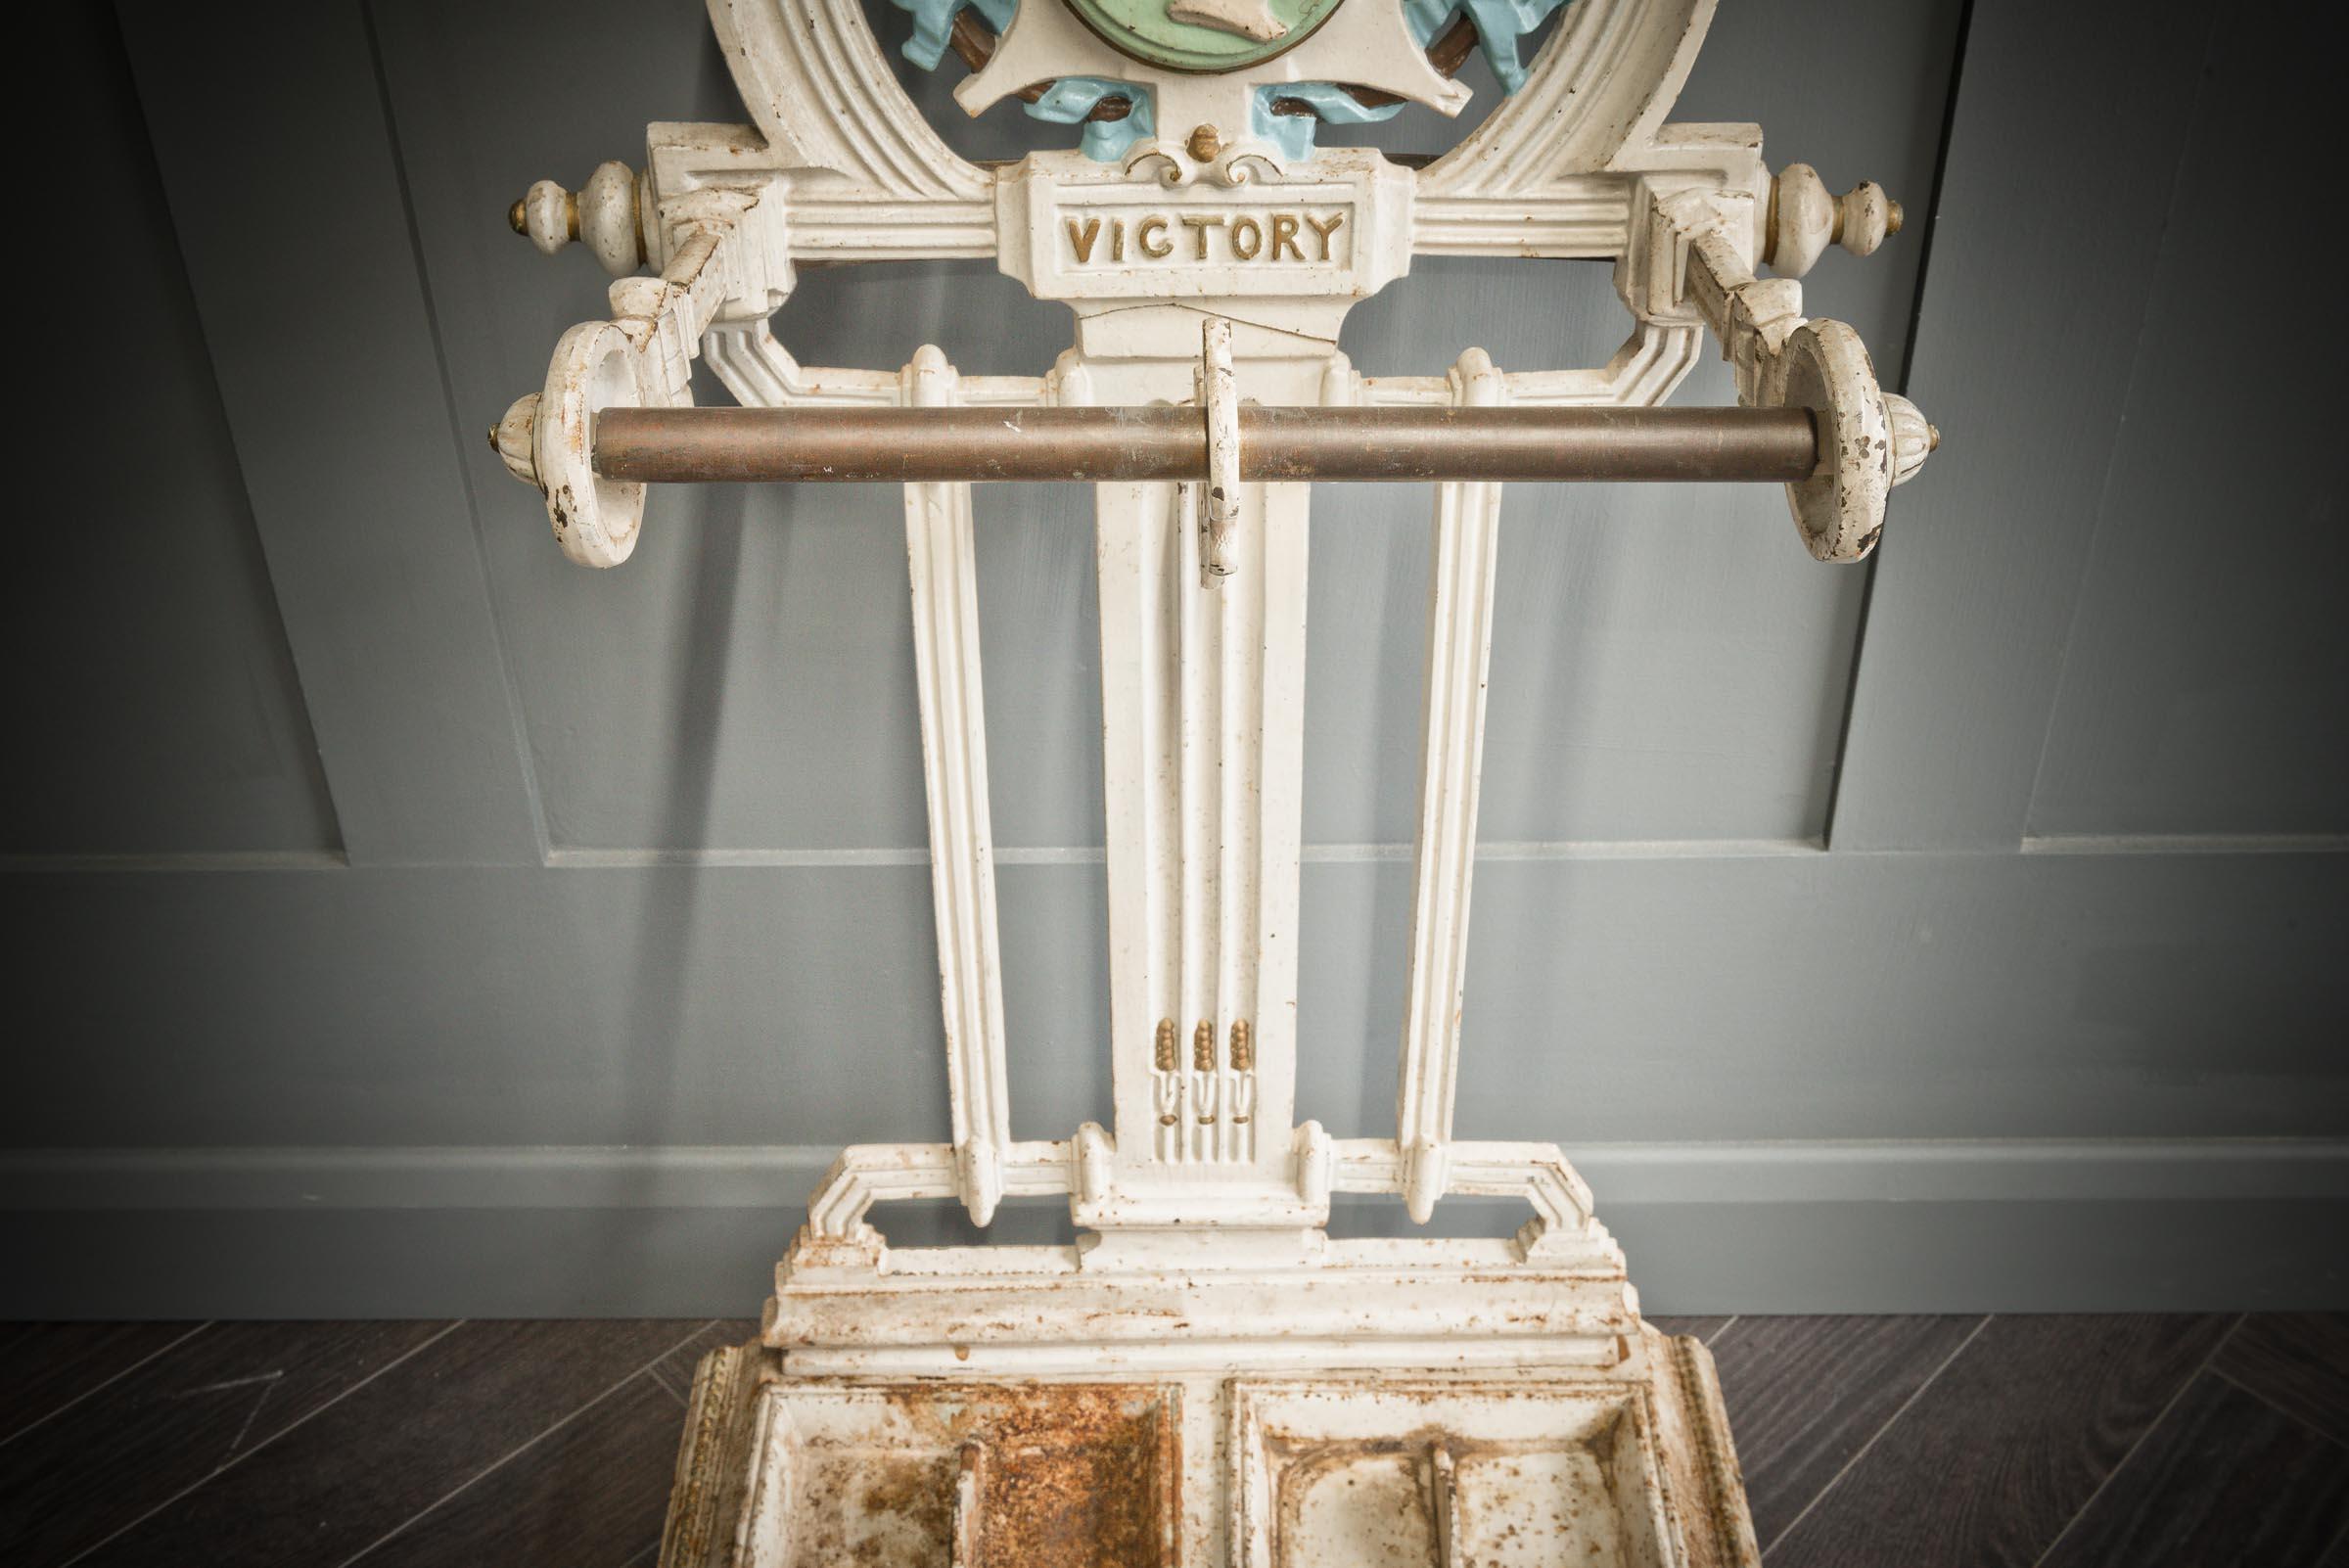 Victory Embossed Cast Iron Umbrella Stand For Sale 1